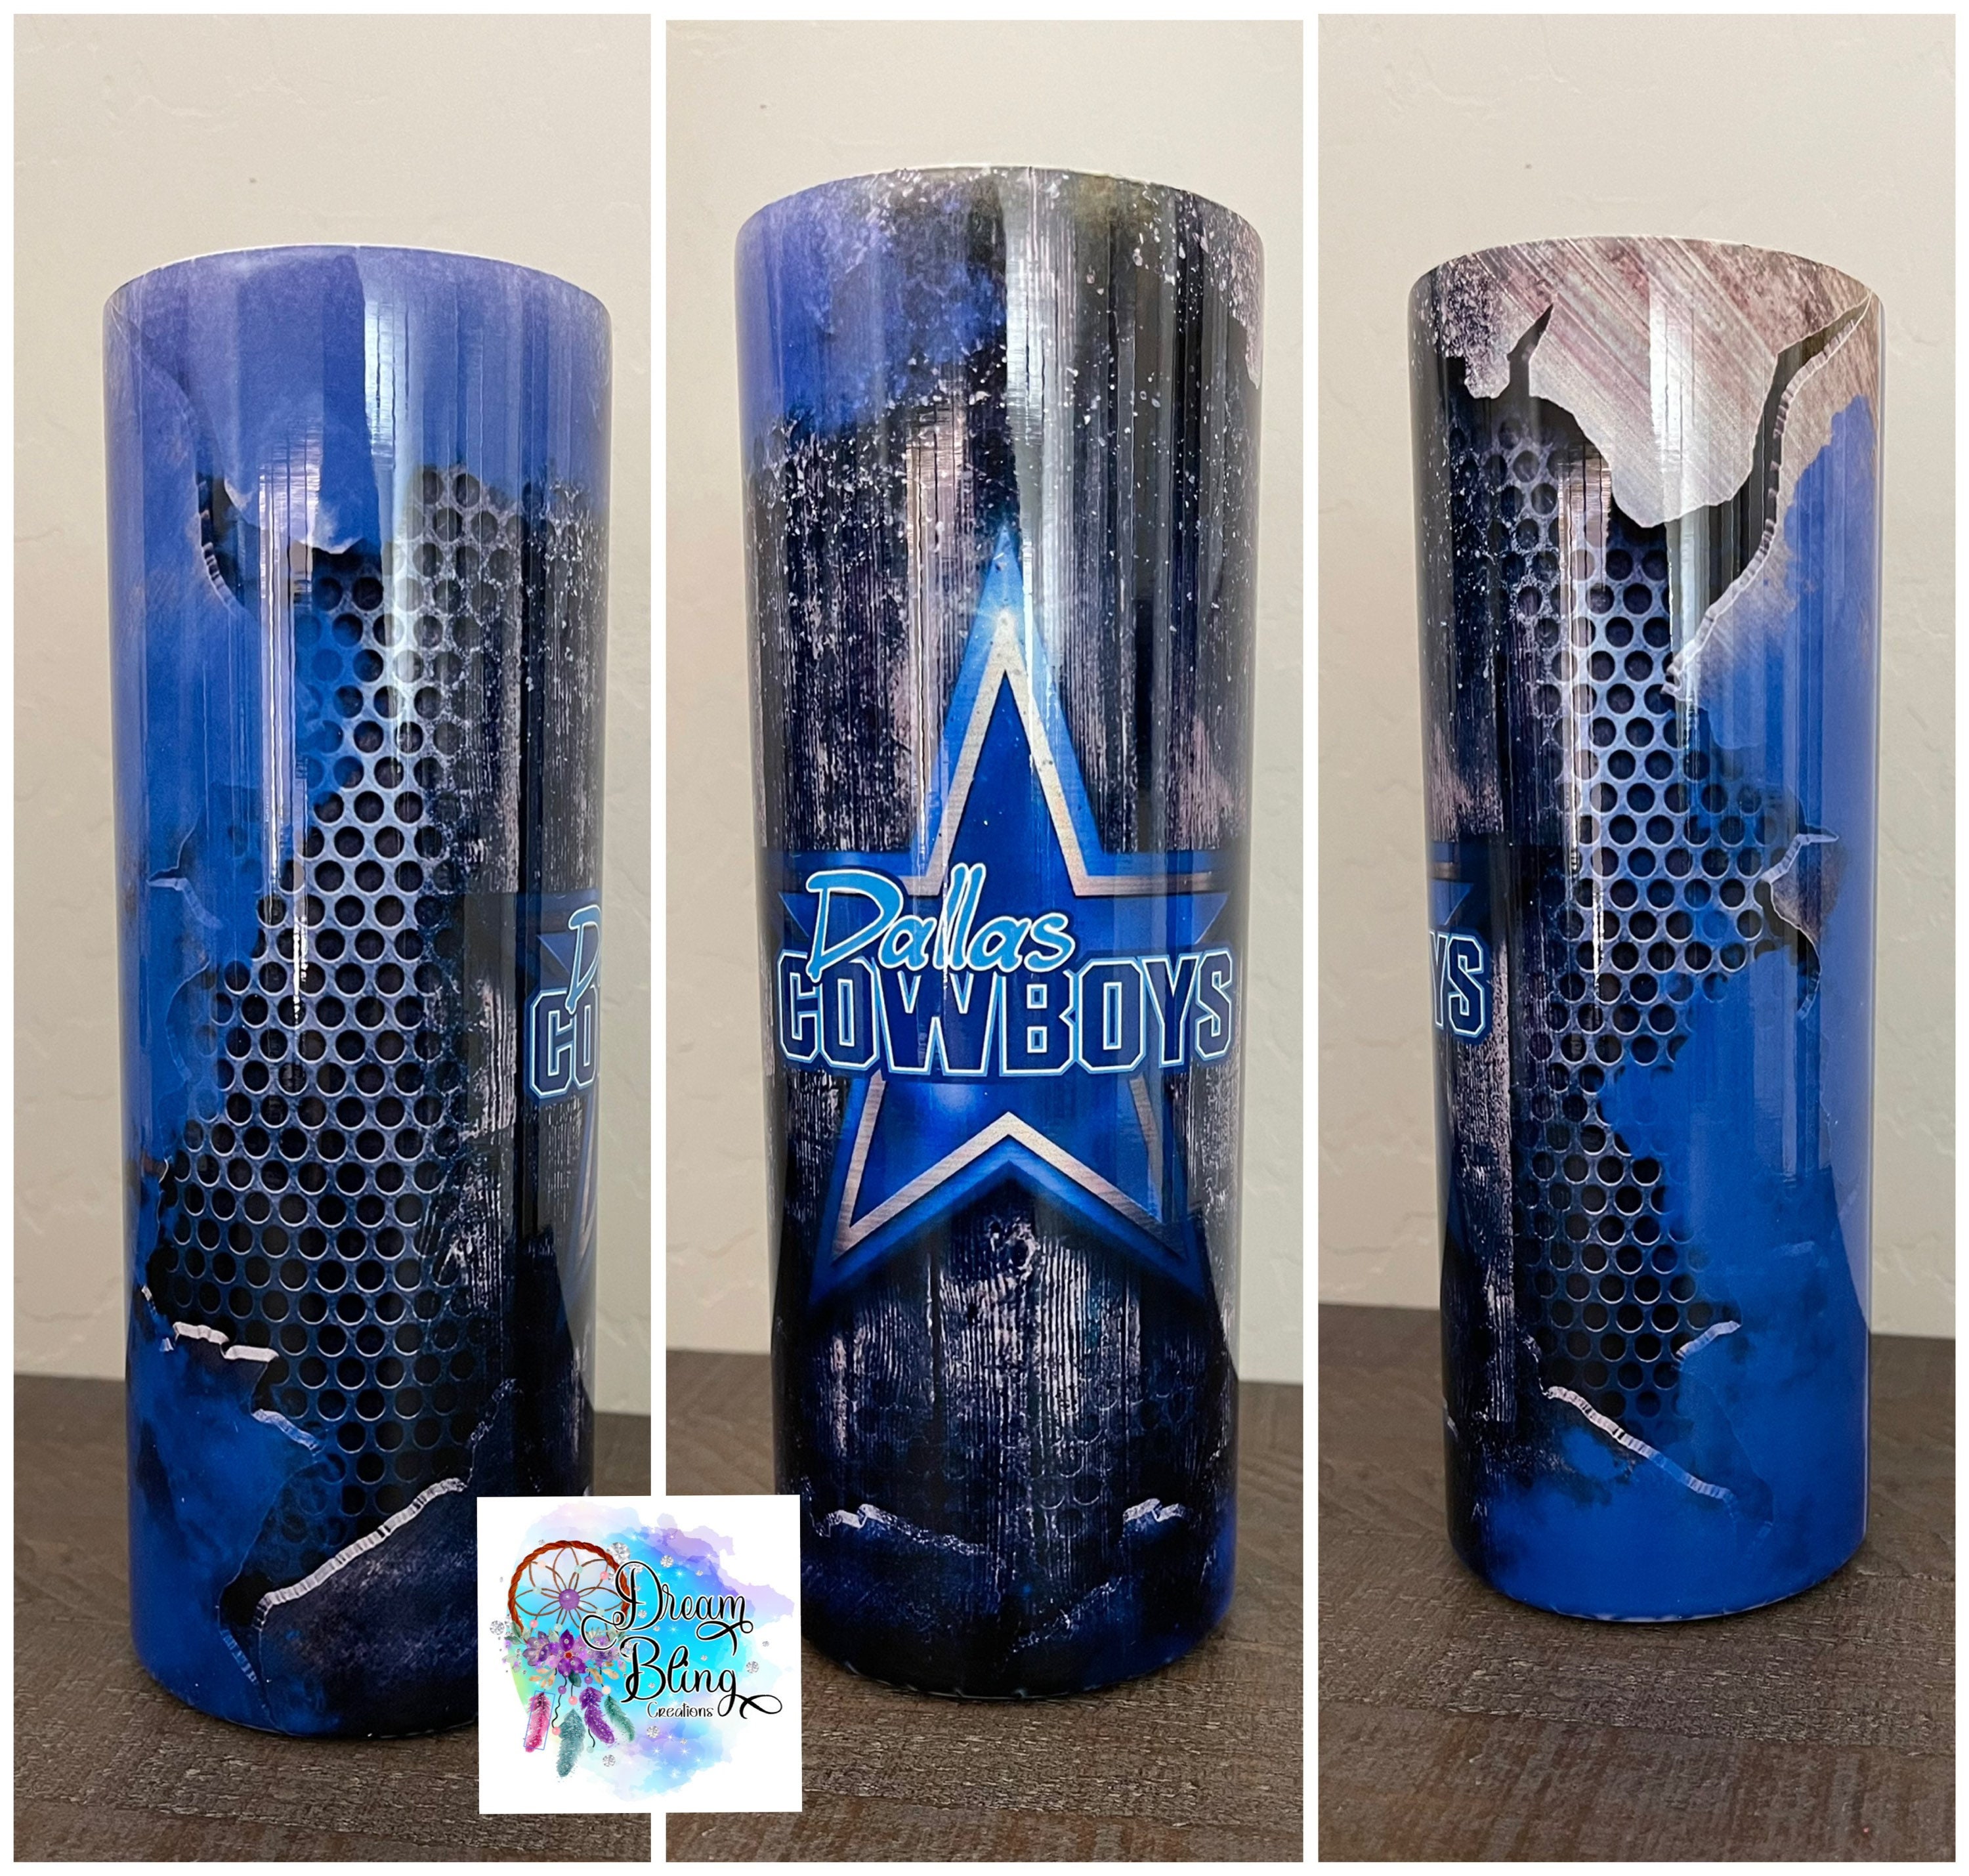 NFL Dallas Cowboys stainless steel 18oz double wall thermos